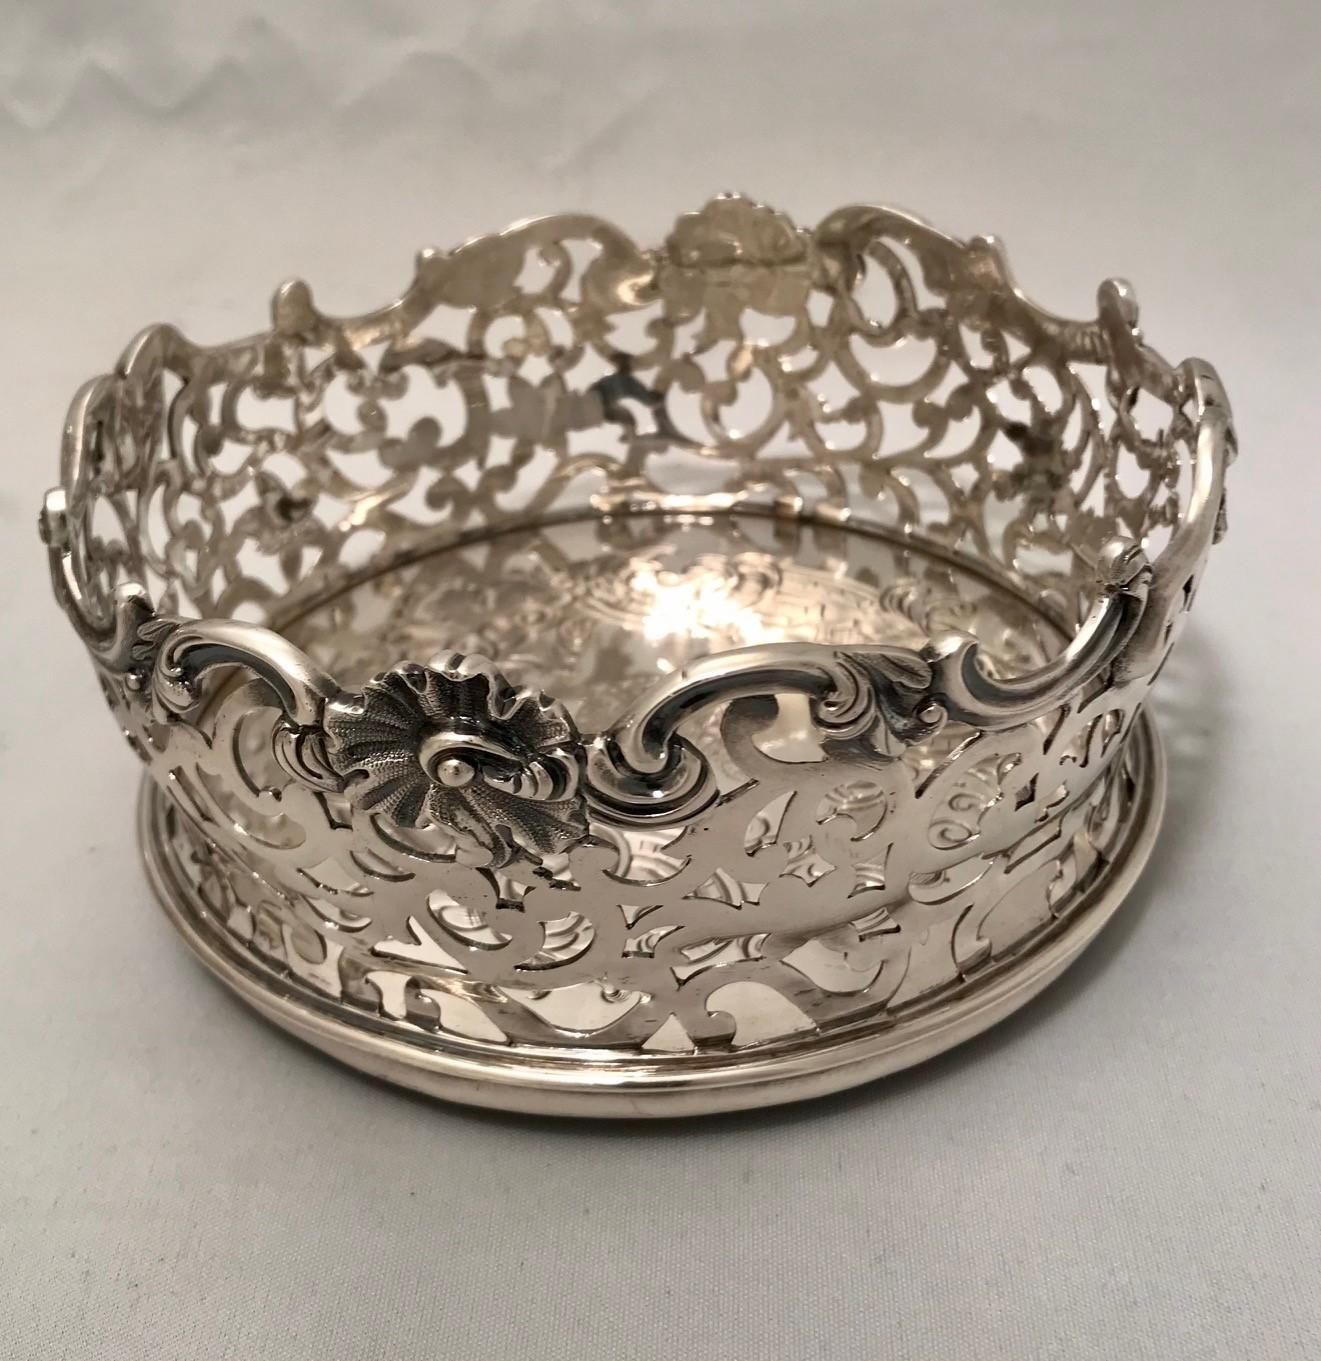 This is a magnificent pair of Victorian silver wine bottle coasters, pierced and with undulating shell and scroll mounted rims. Usually the wooden base is left au naturel but in this case it is also silver and engraved with the Order of the Bath and